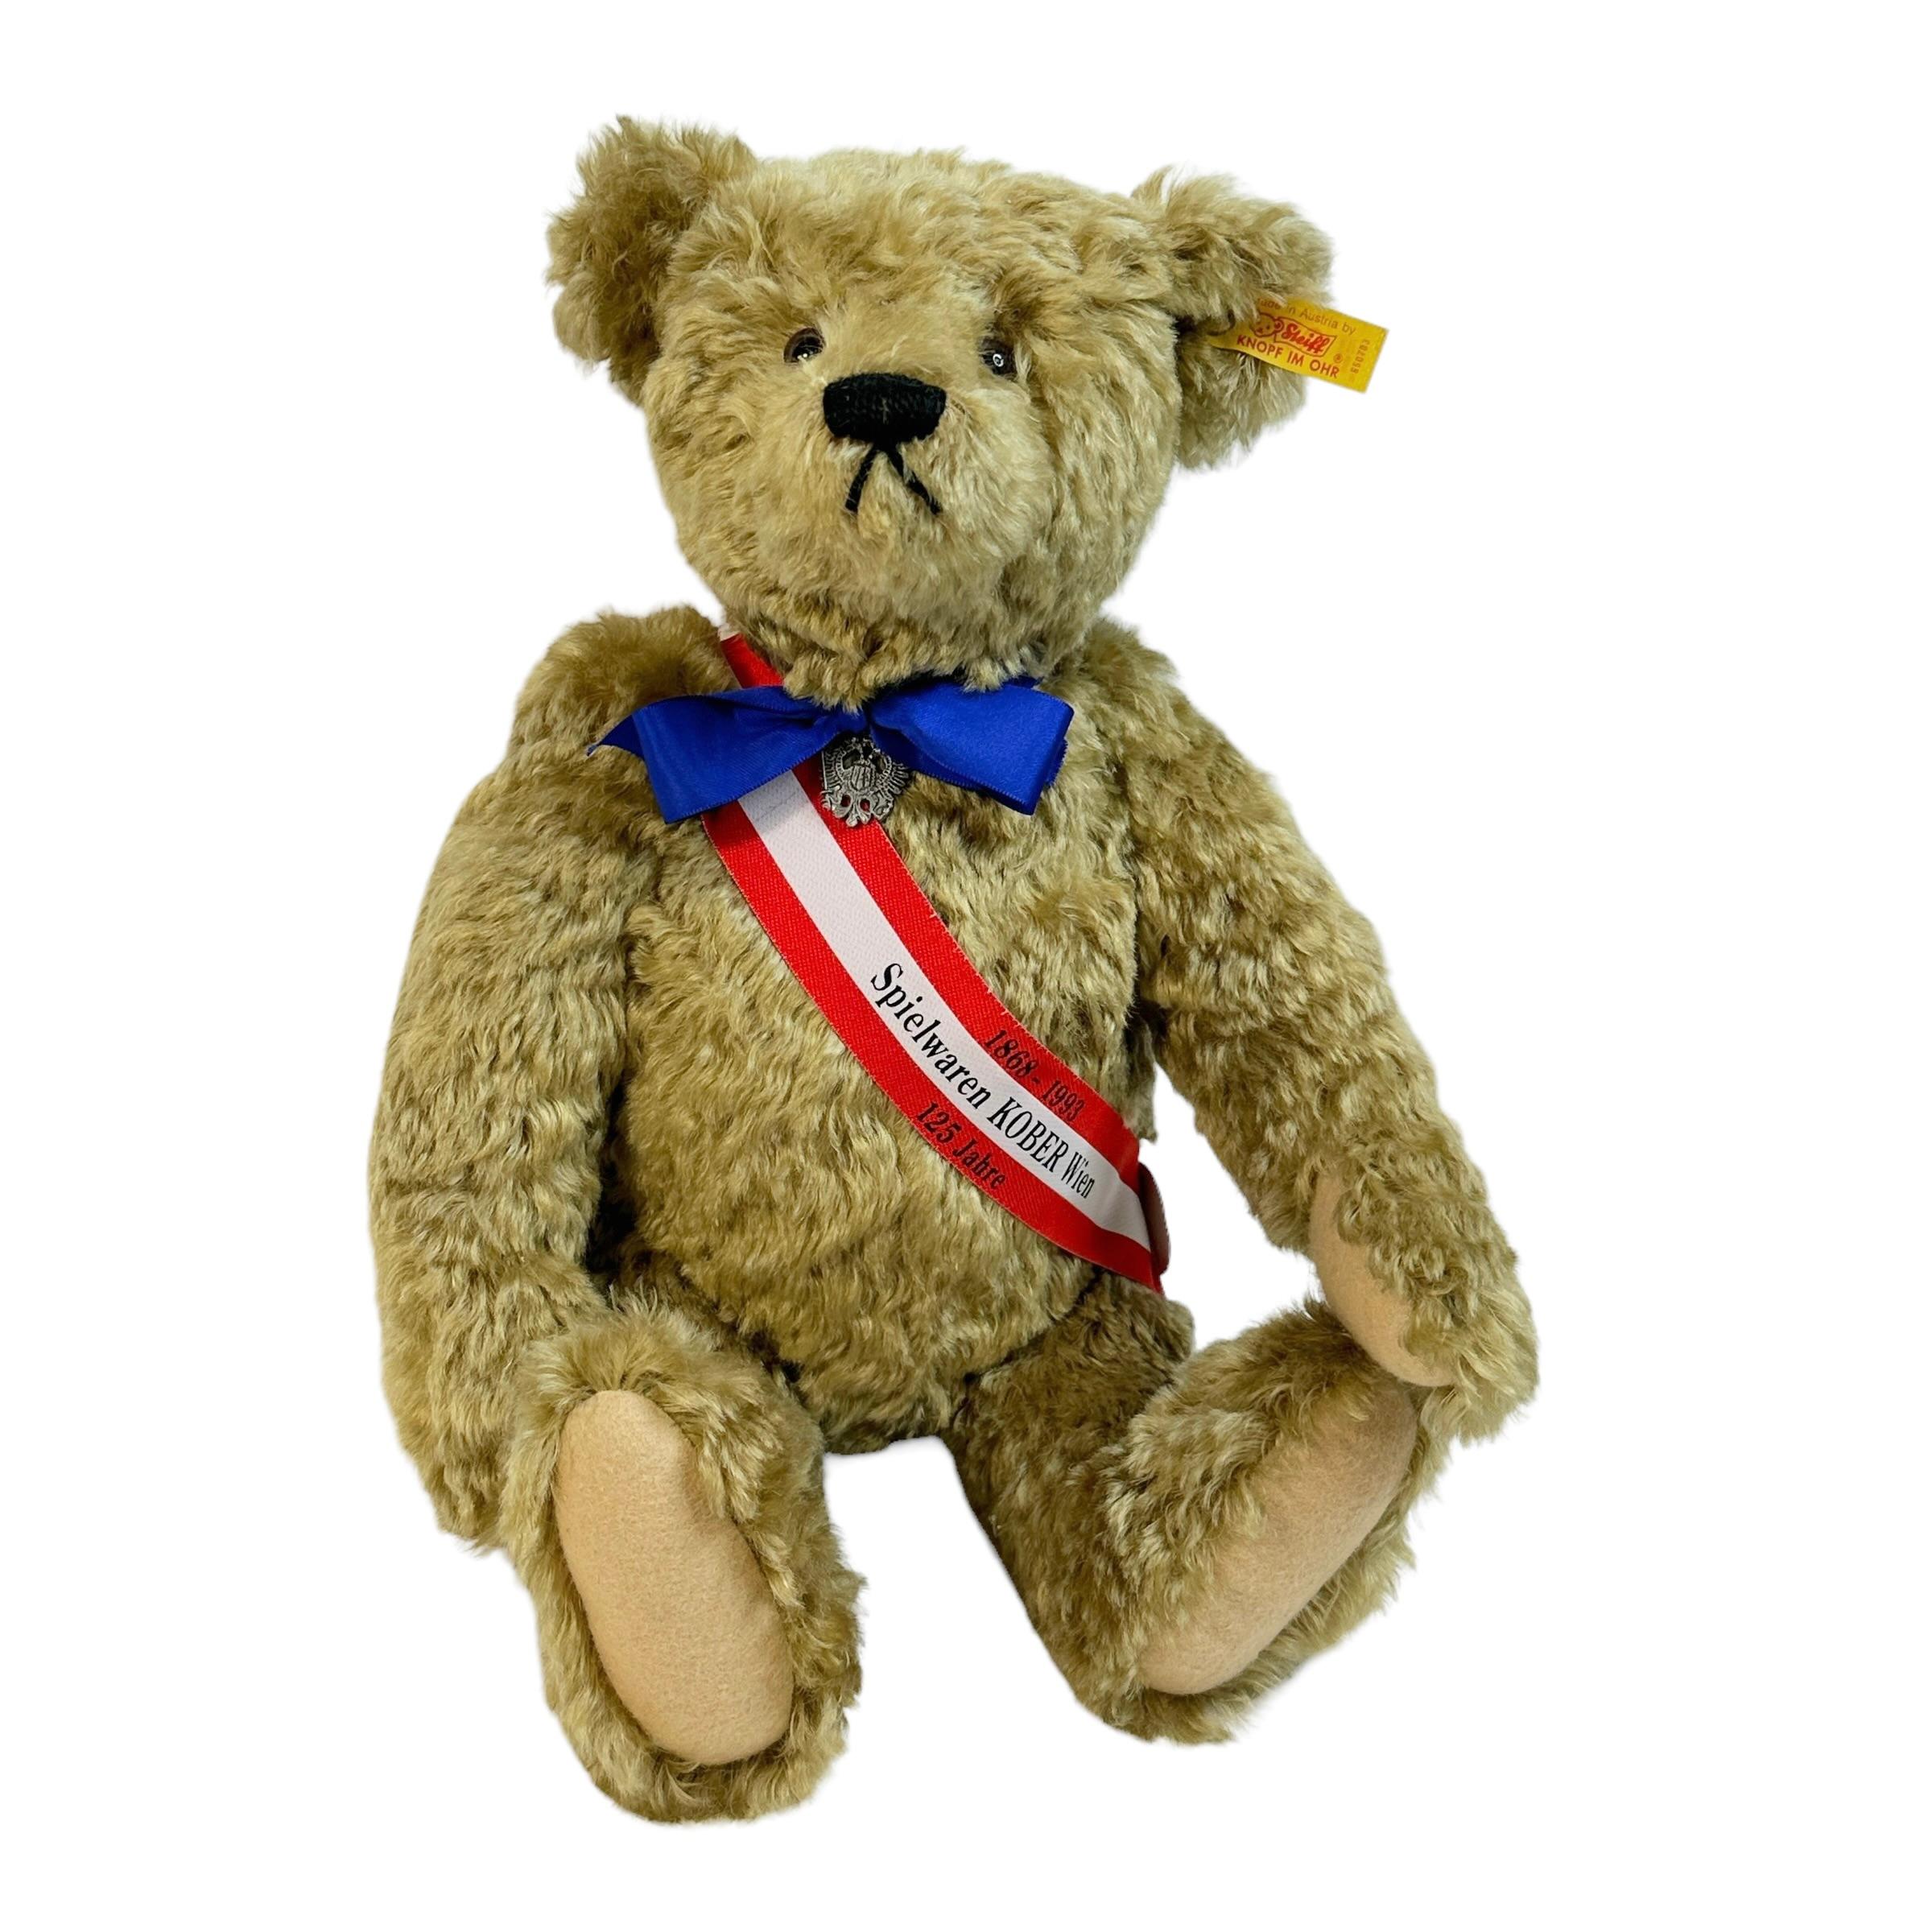 The Classic 1920 Teddybear is the perfect gift for every Steiff lover. The teddy bear is made of the finest mohair and is stuffed with wood shavings.
This product is not a toy and is intended for adult collectors only. It is a Steiff exclusive, made